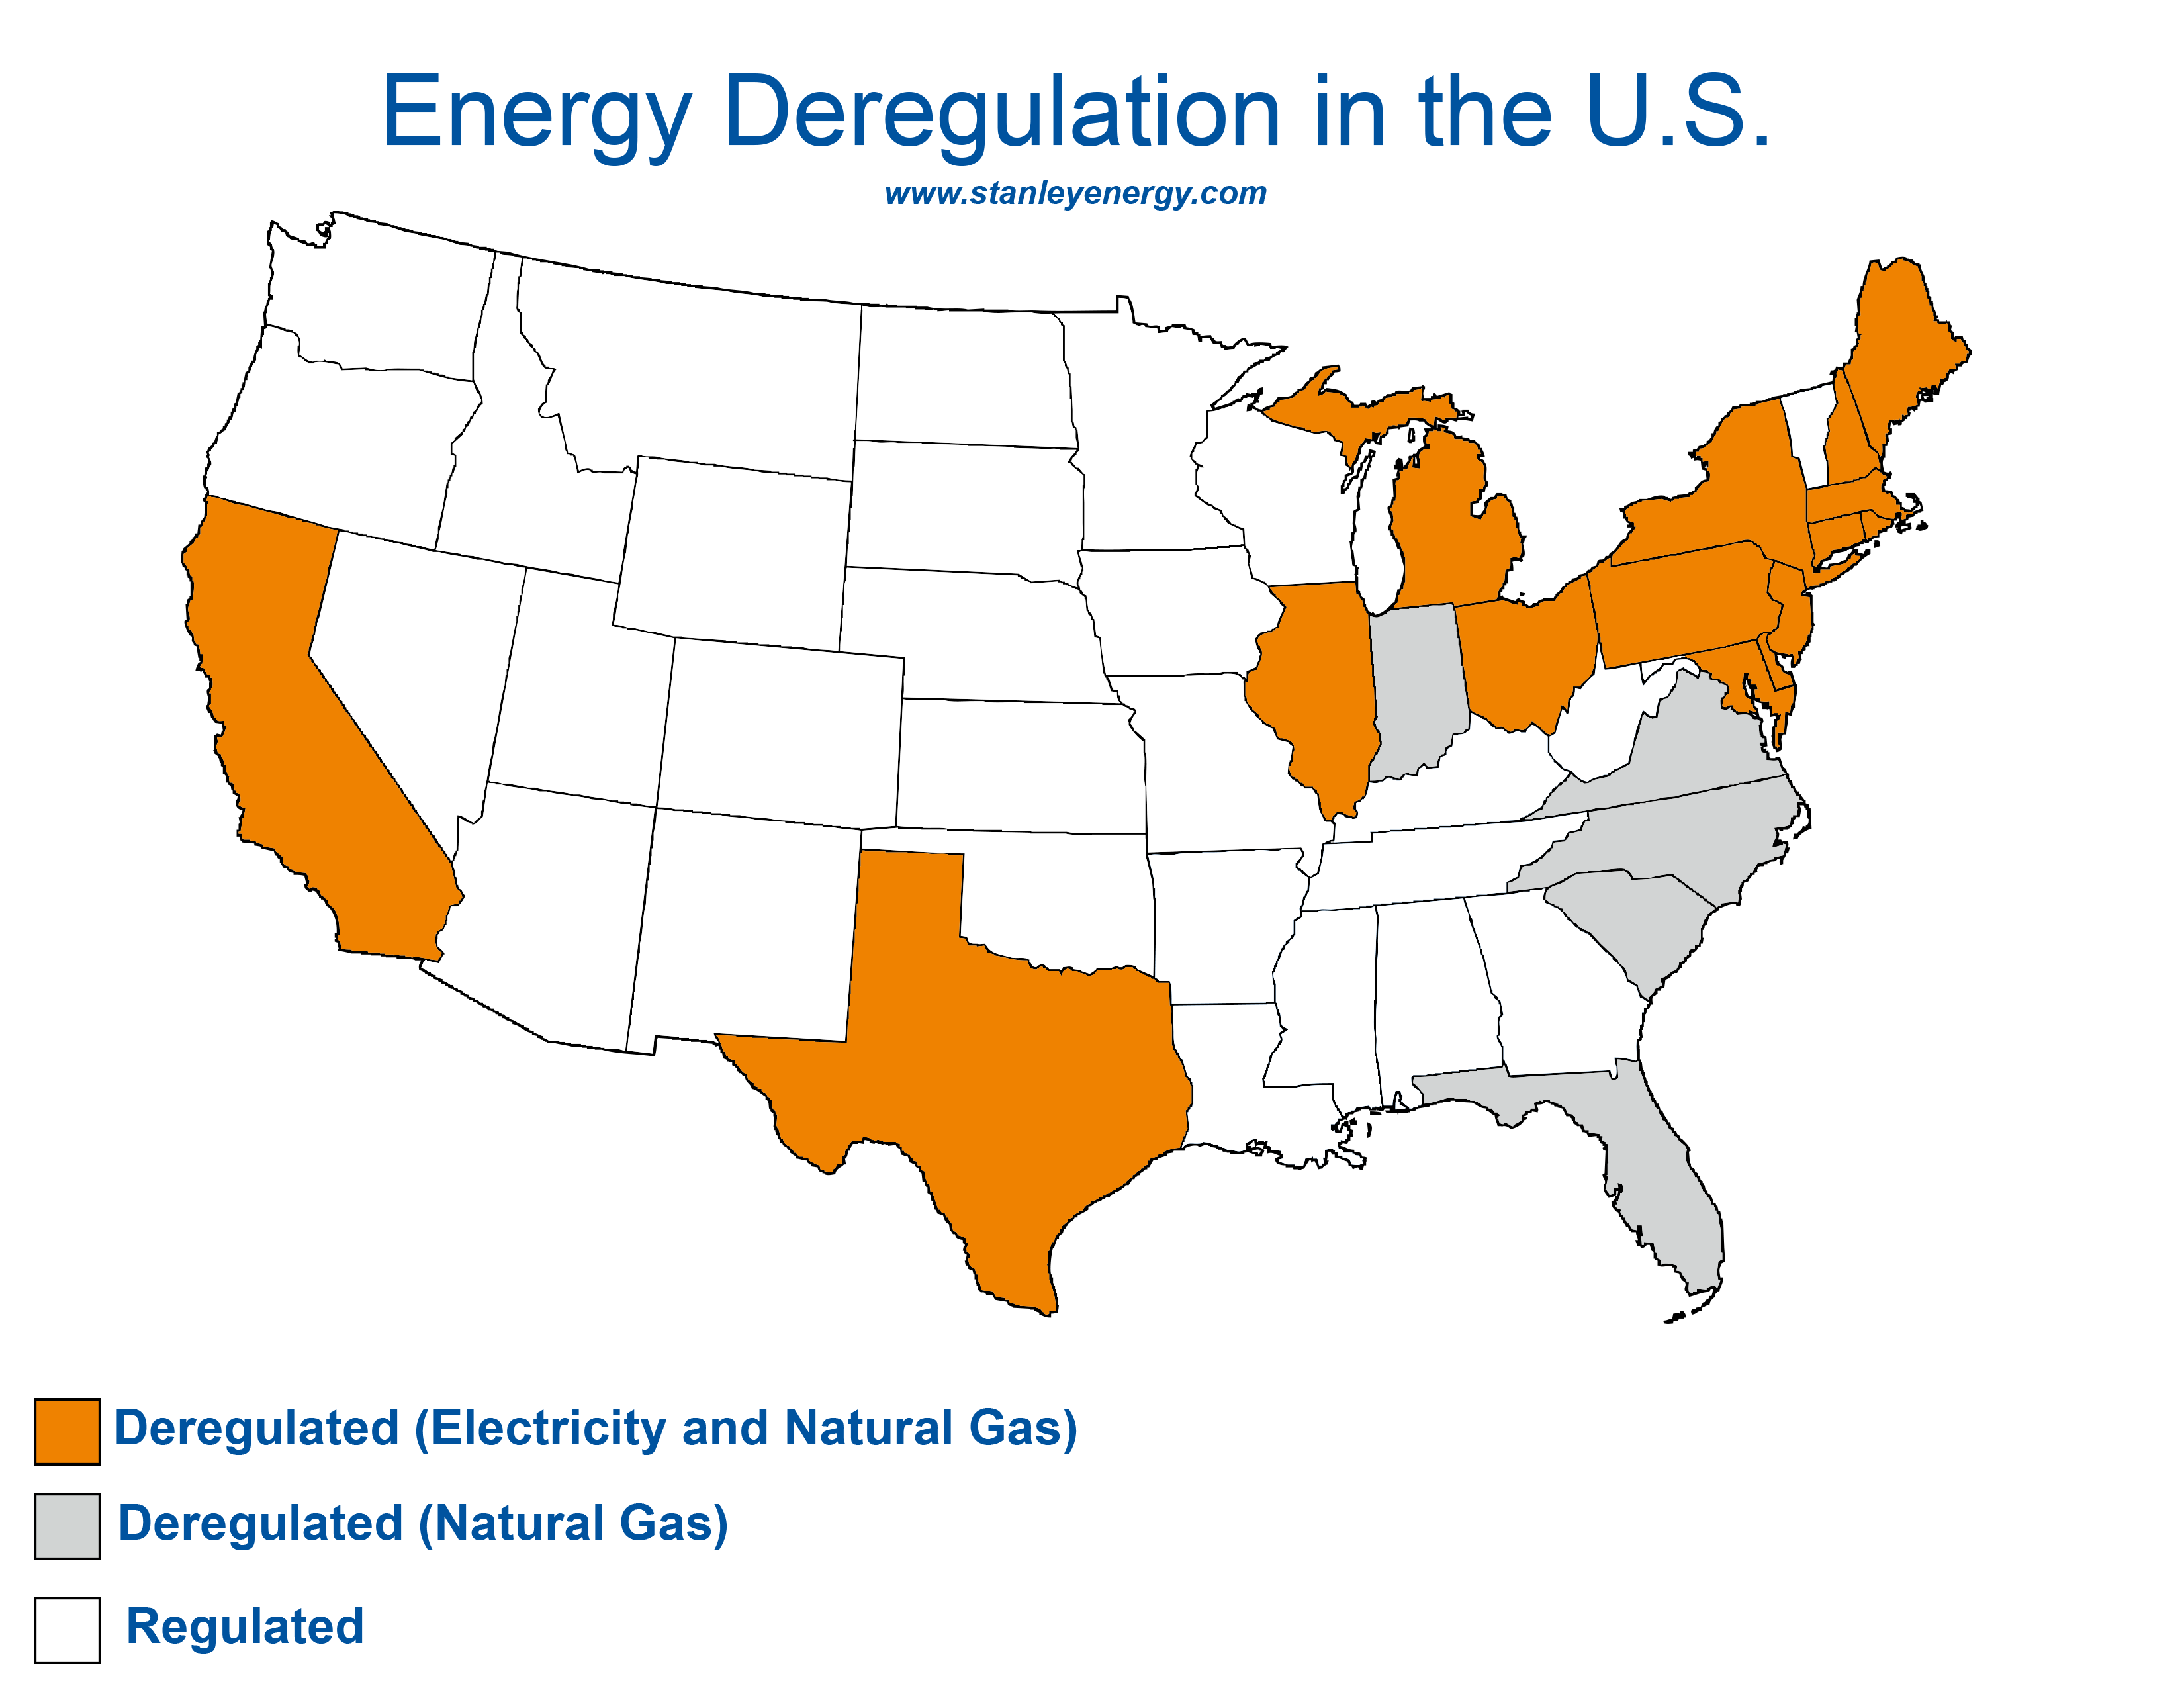 Deregulation and competition between utility companies